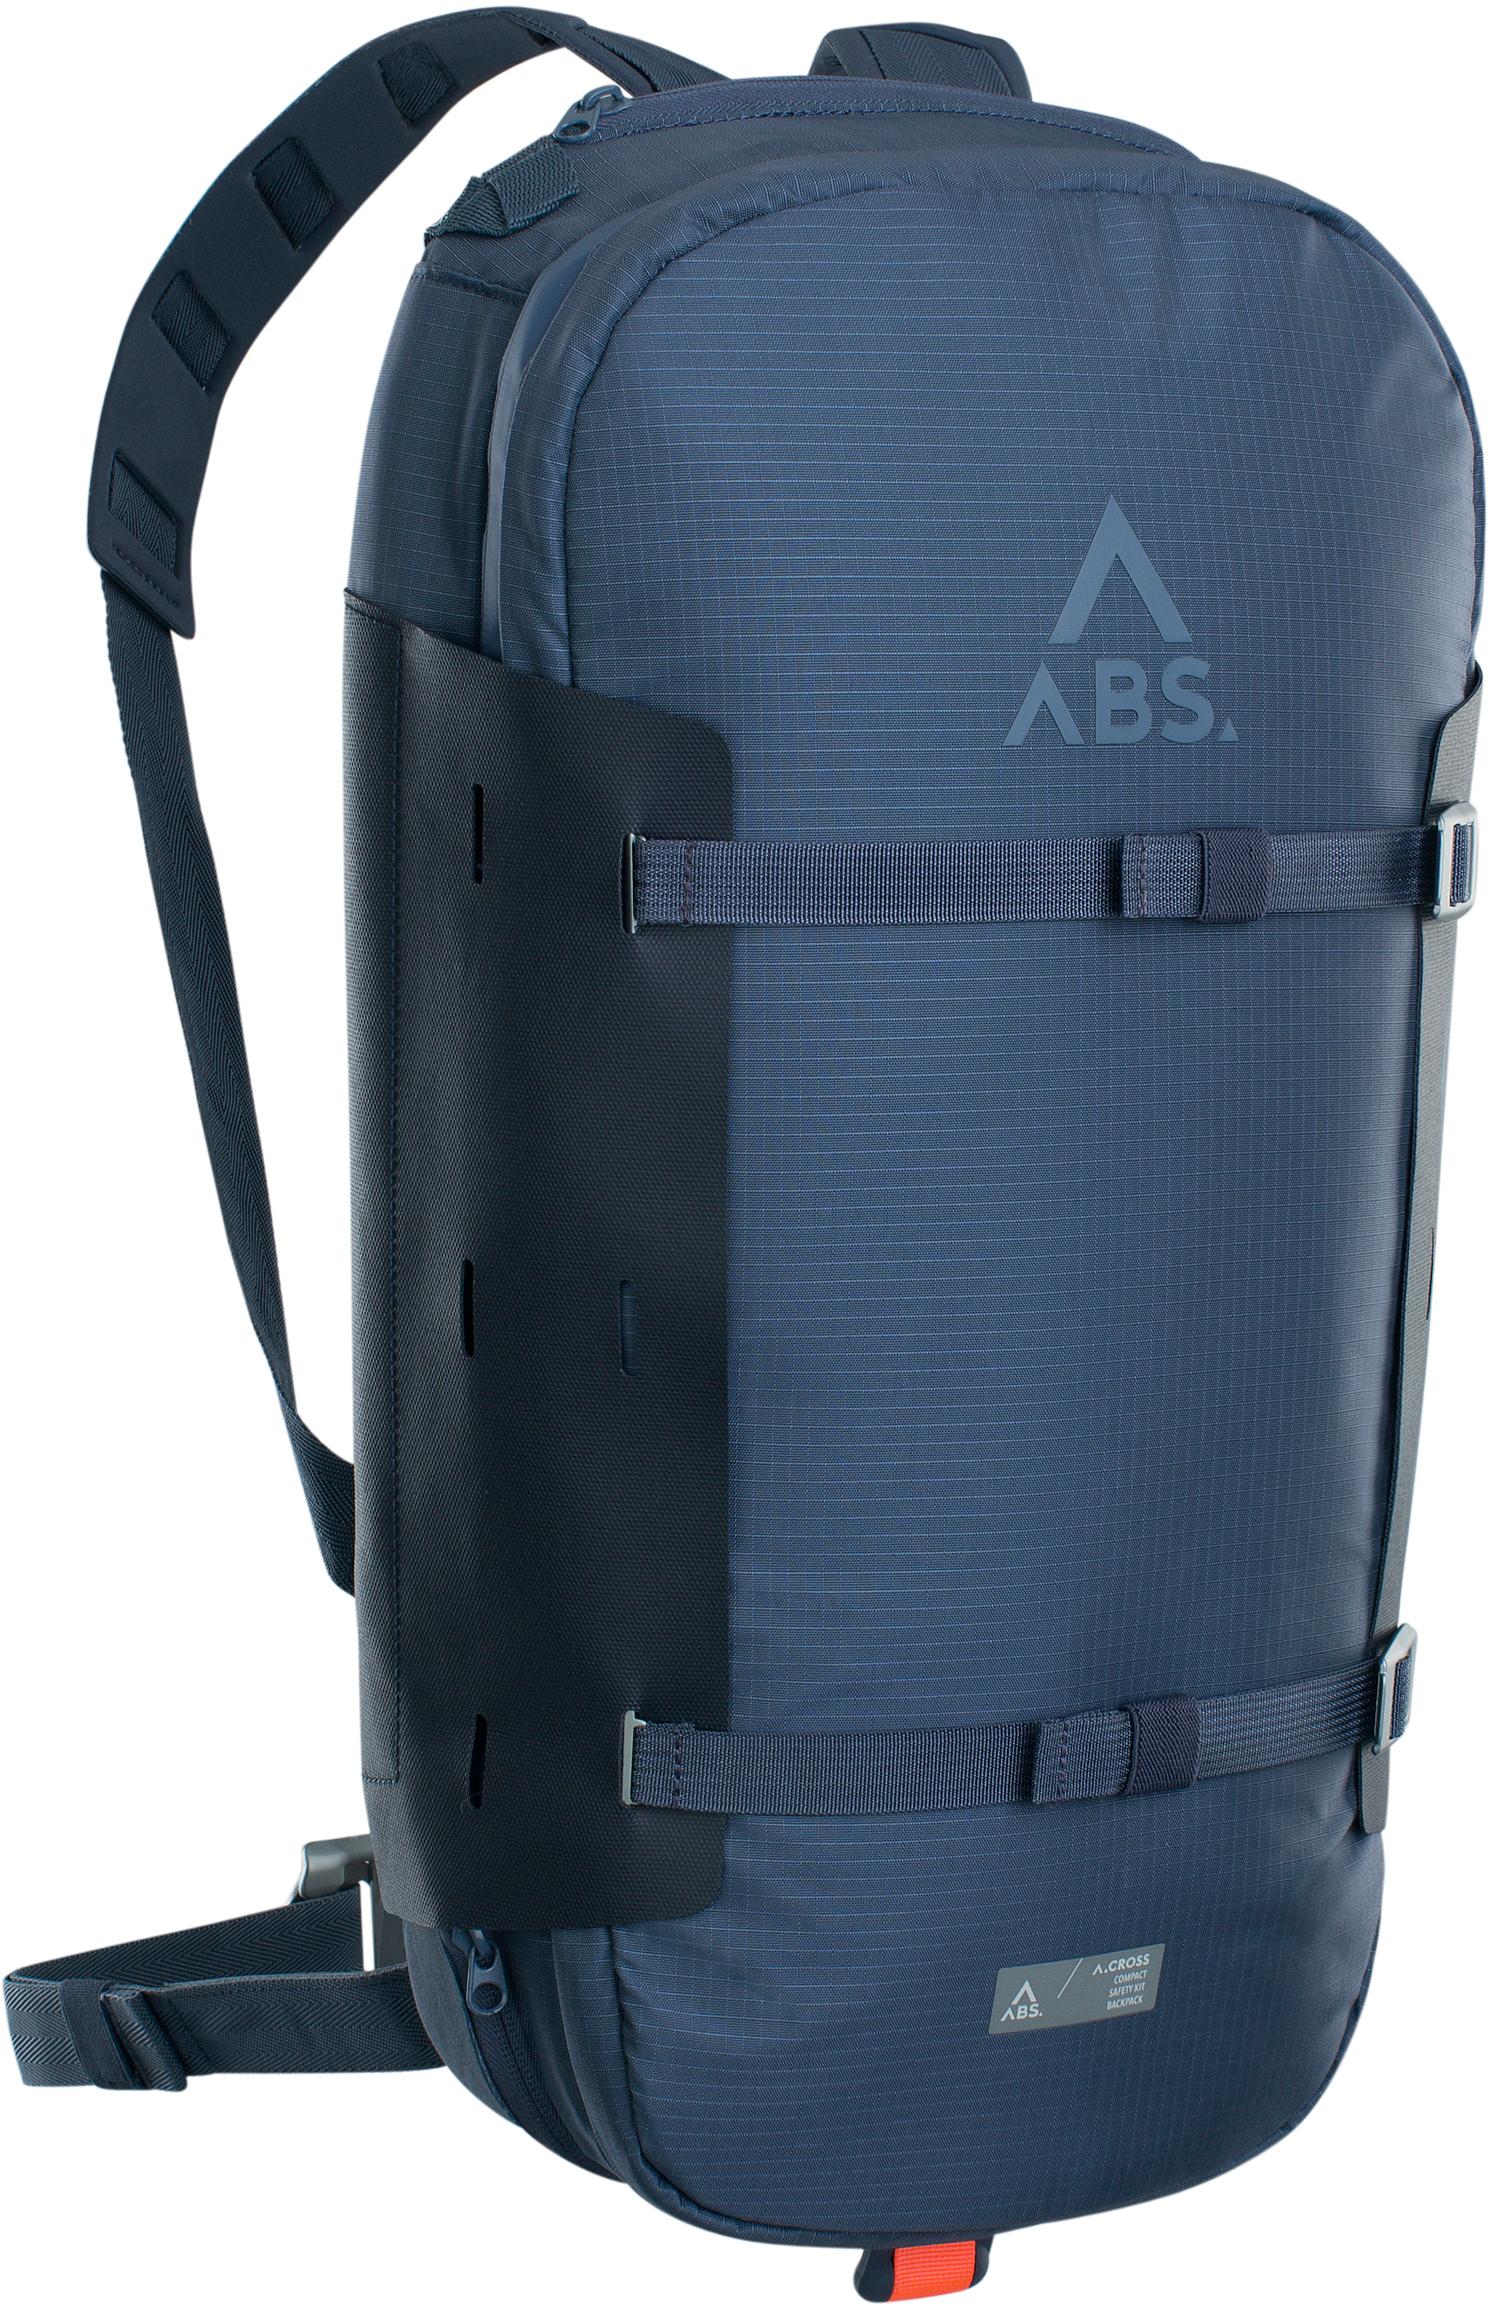 Image of ABS A.CROSS small Tourenrucksack